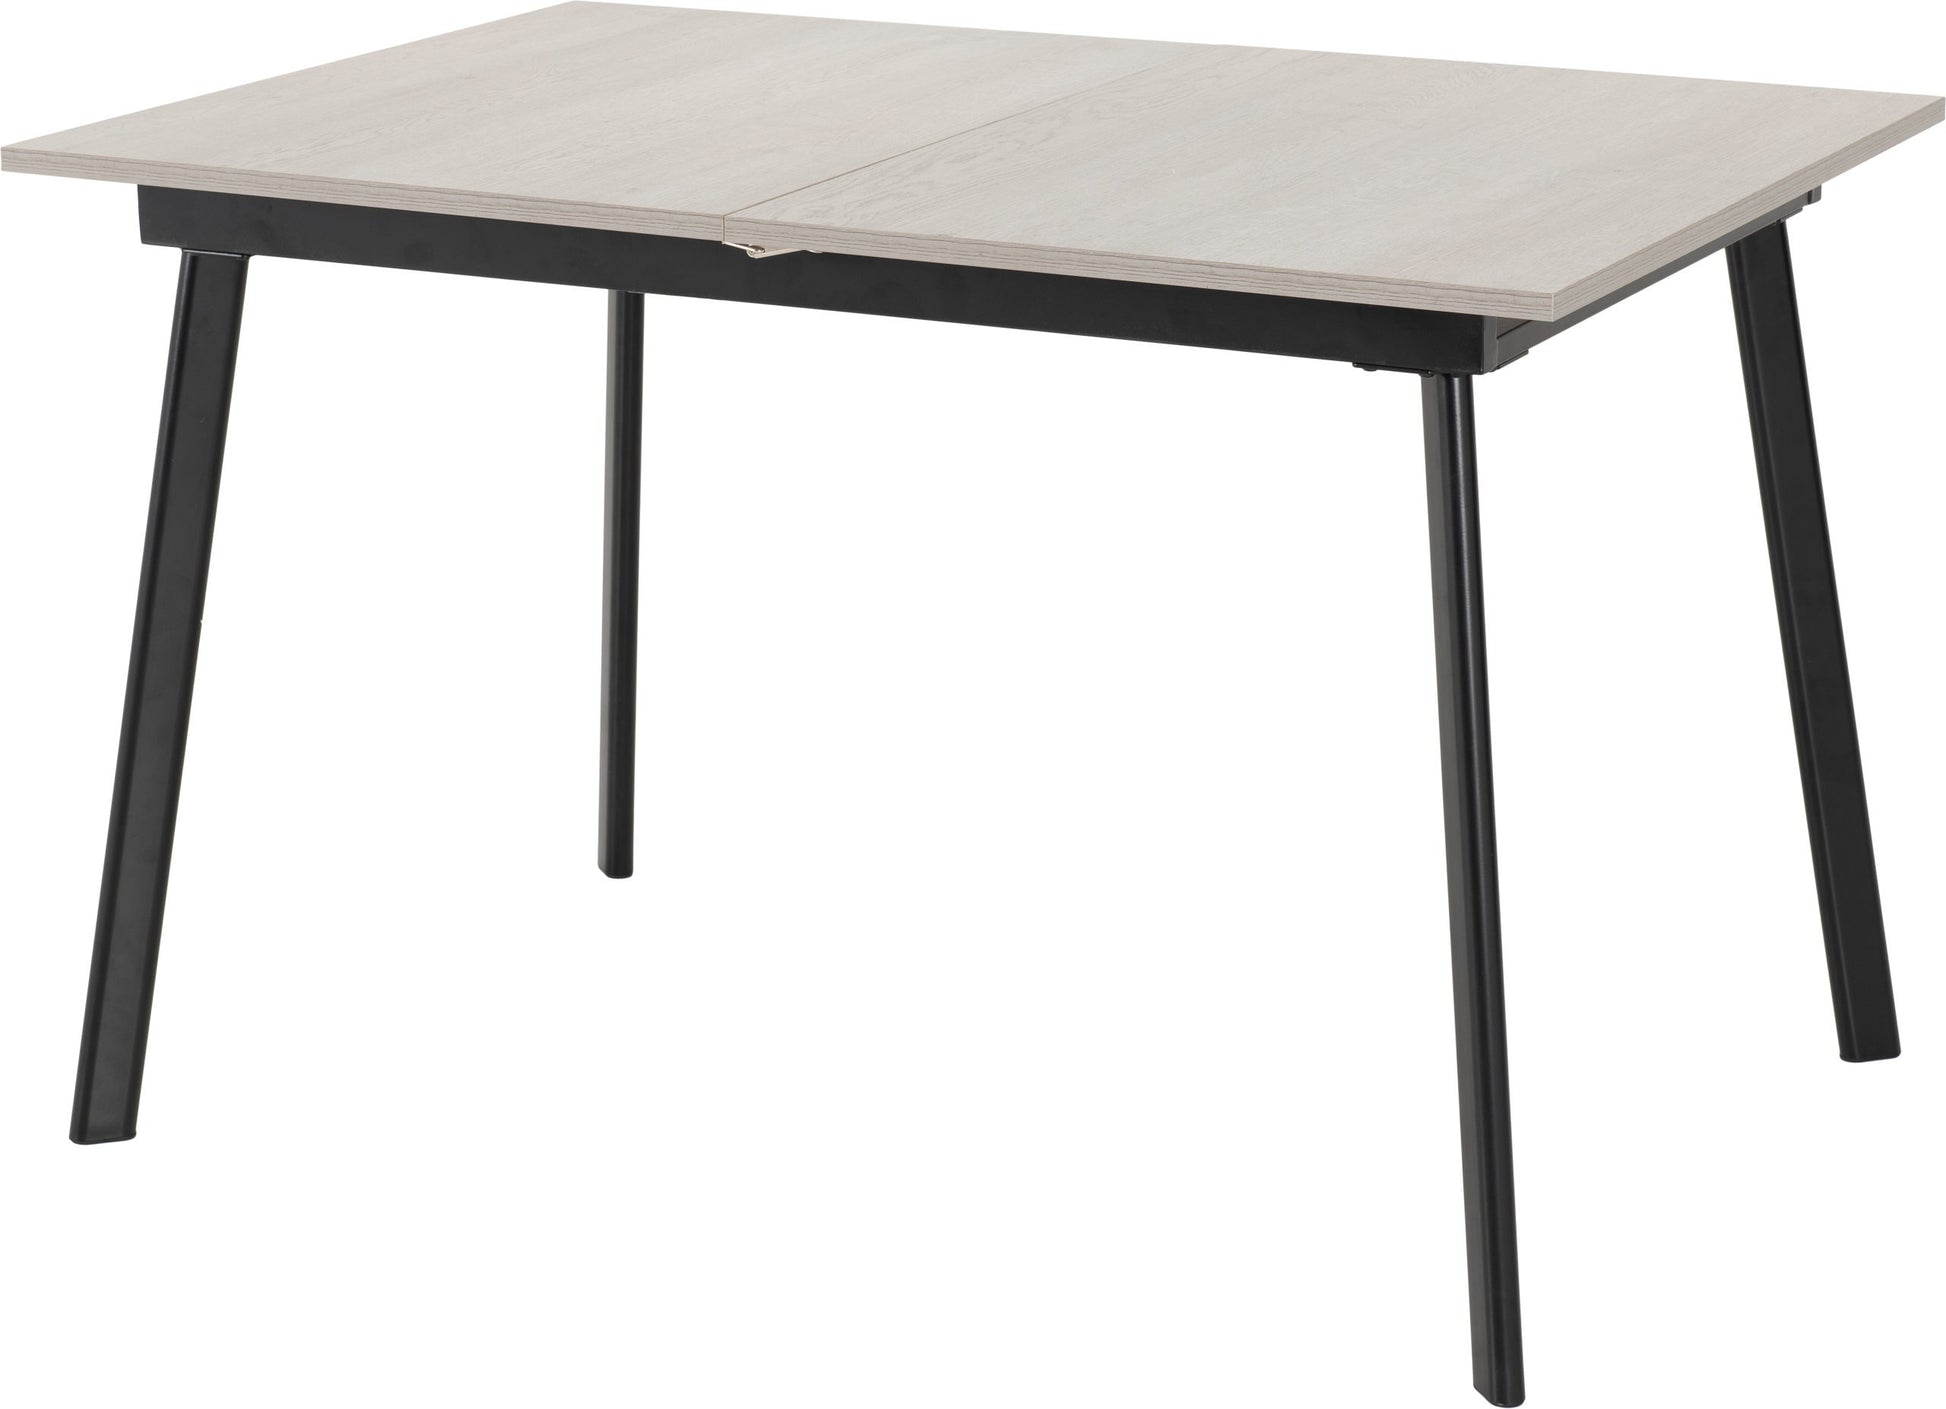 Avery Extending Dining Table- Concrete/Grey Oak Effect/Black- The Right Buy Store